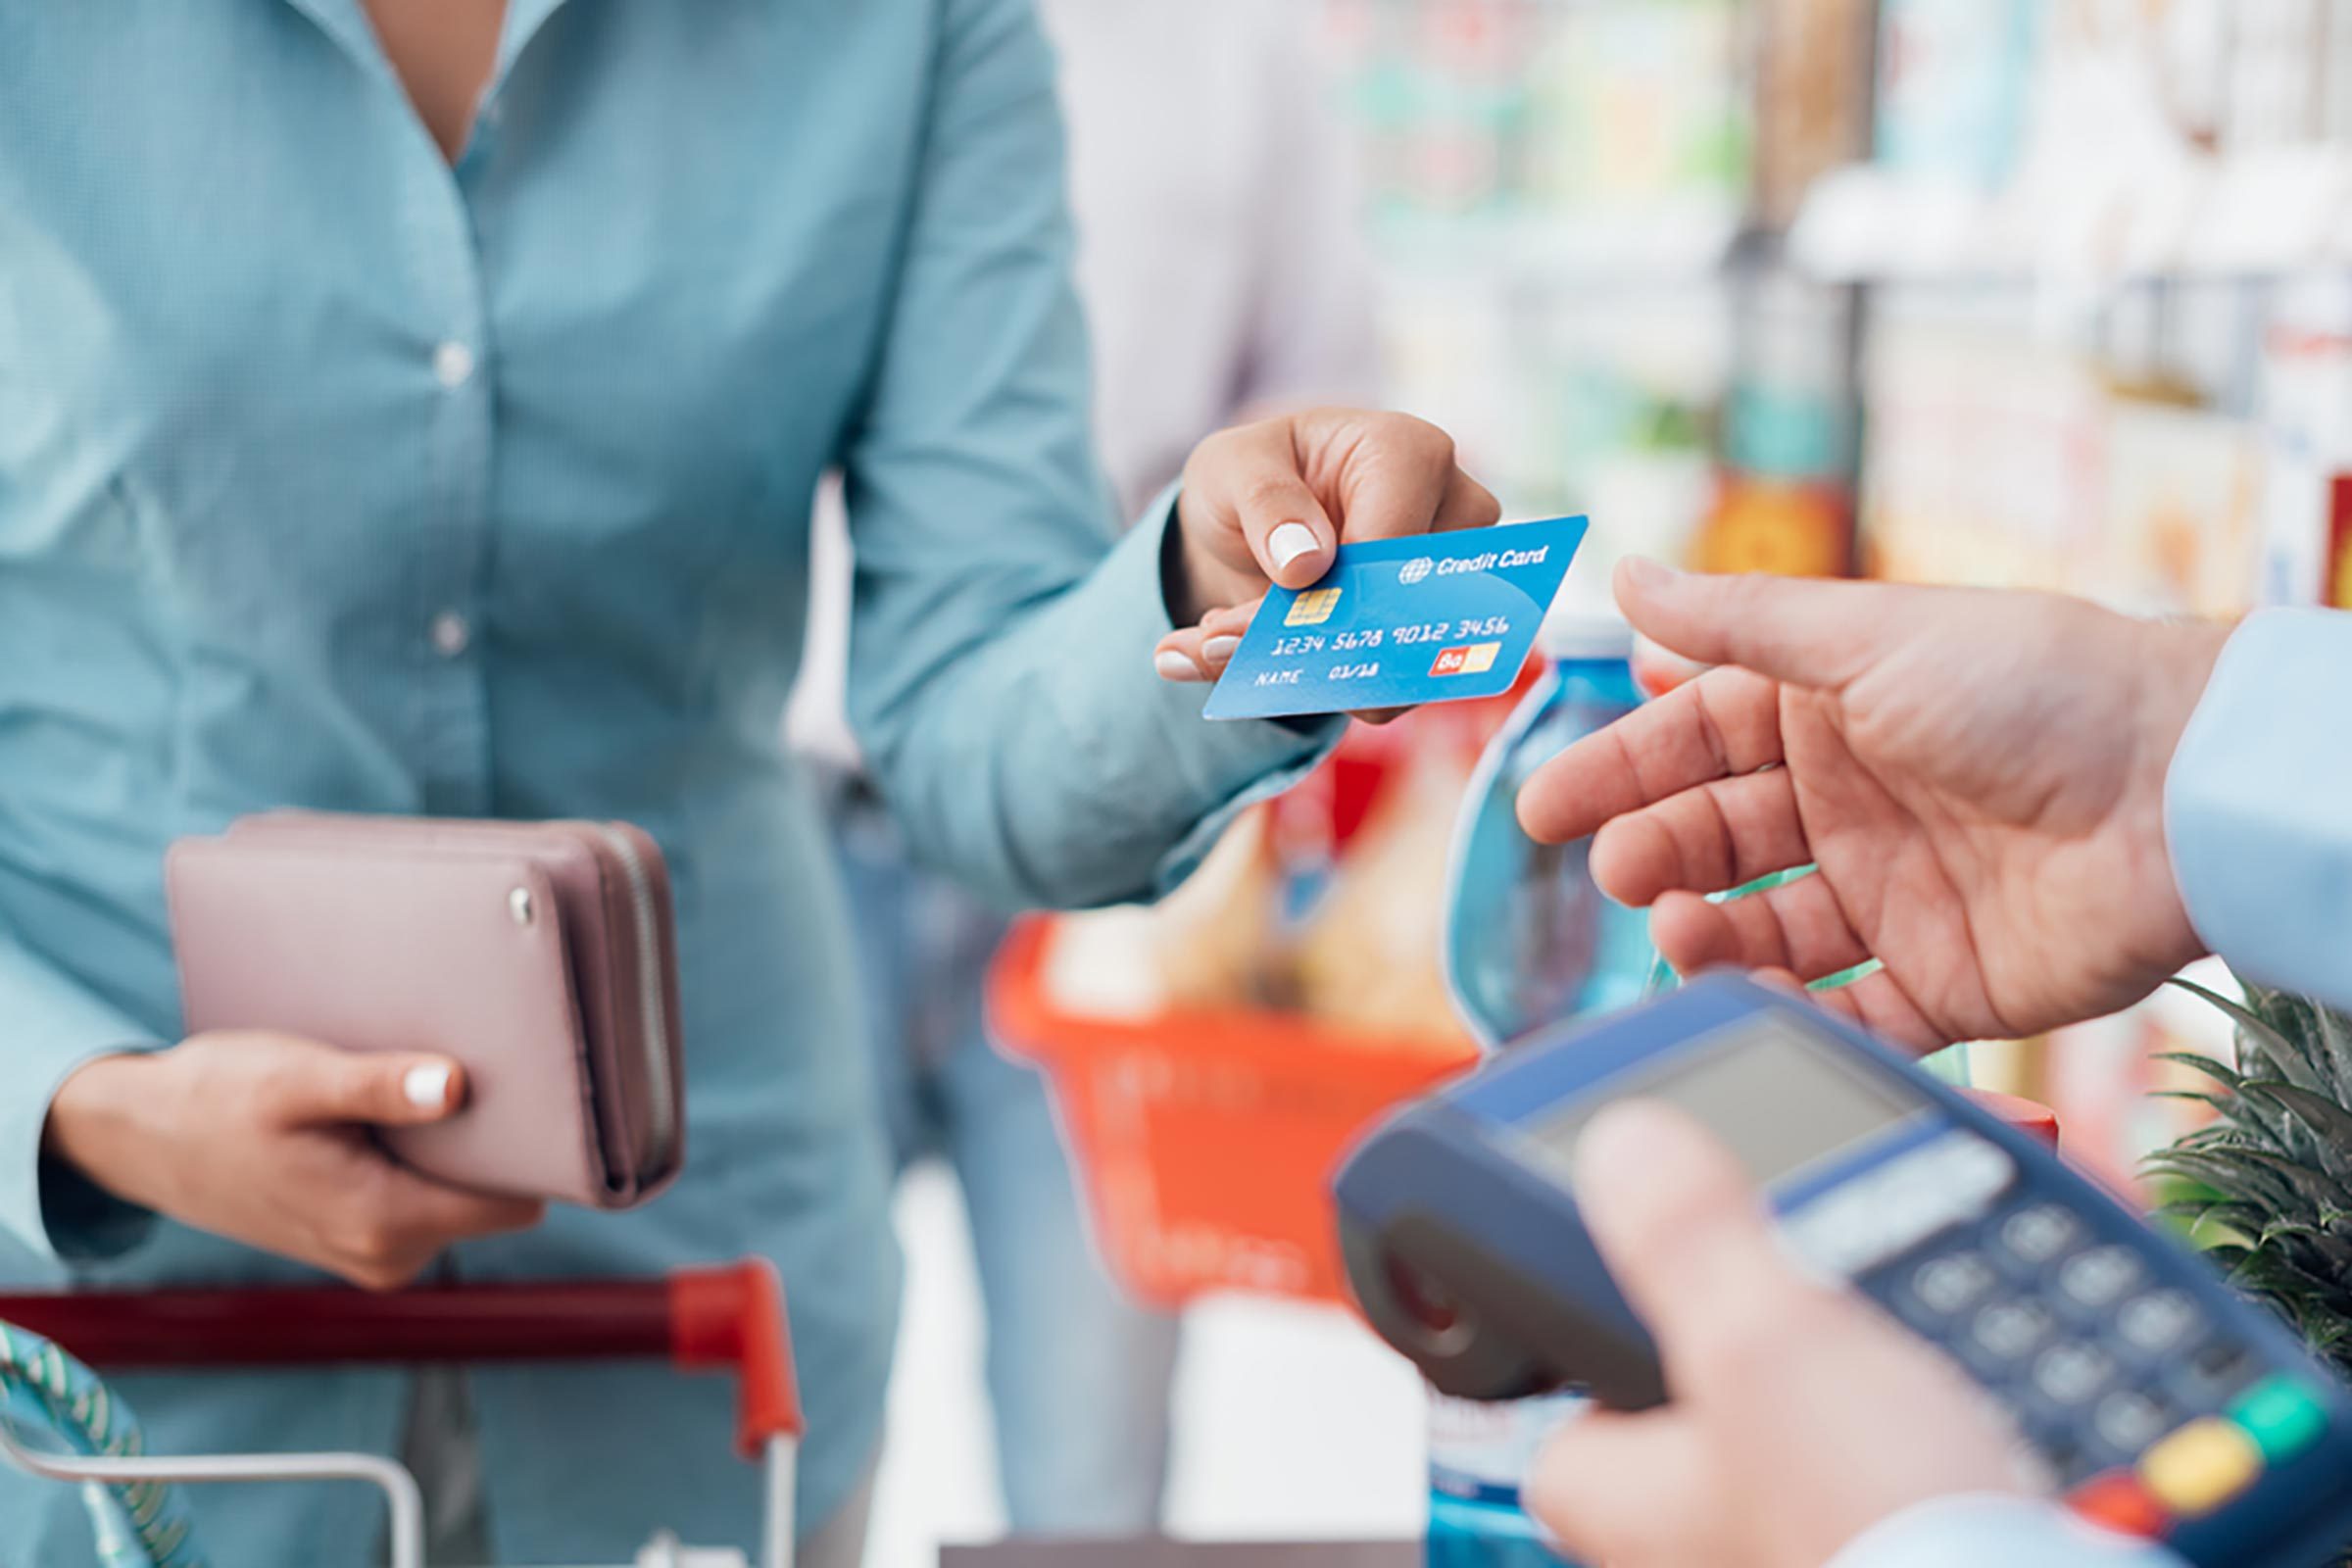 Person handing over a credit card to a cashier at a store